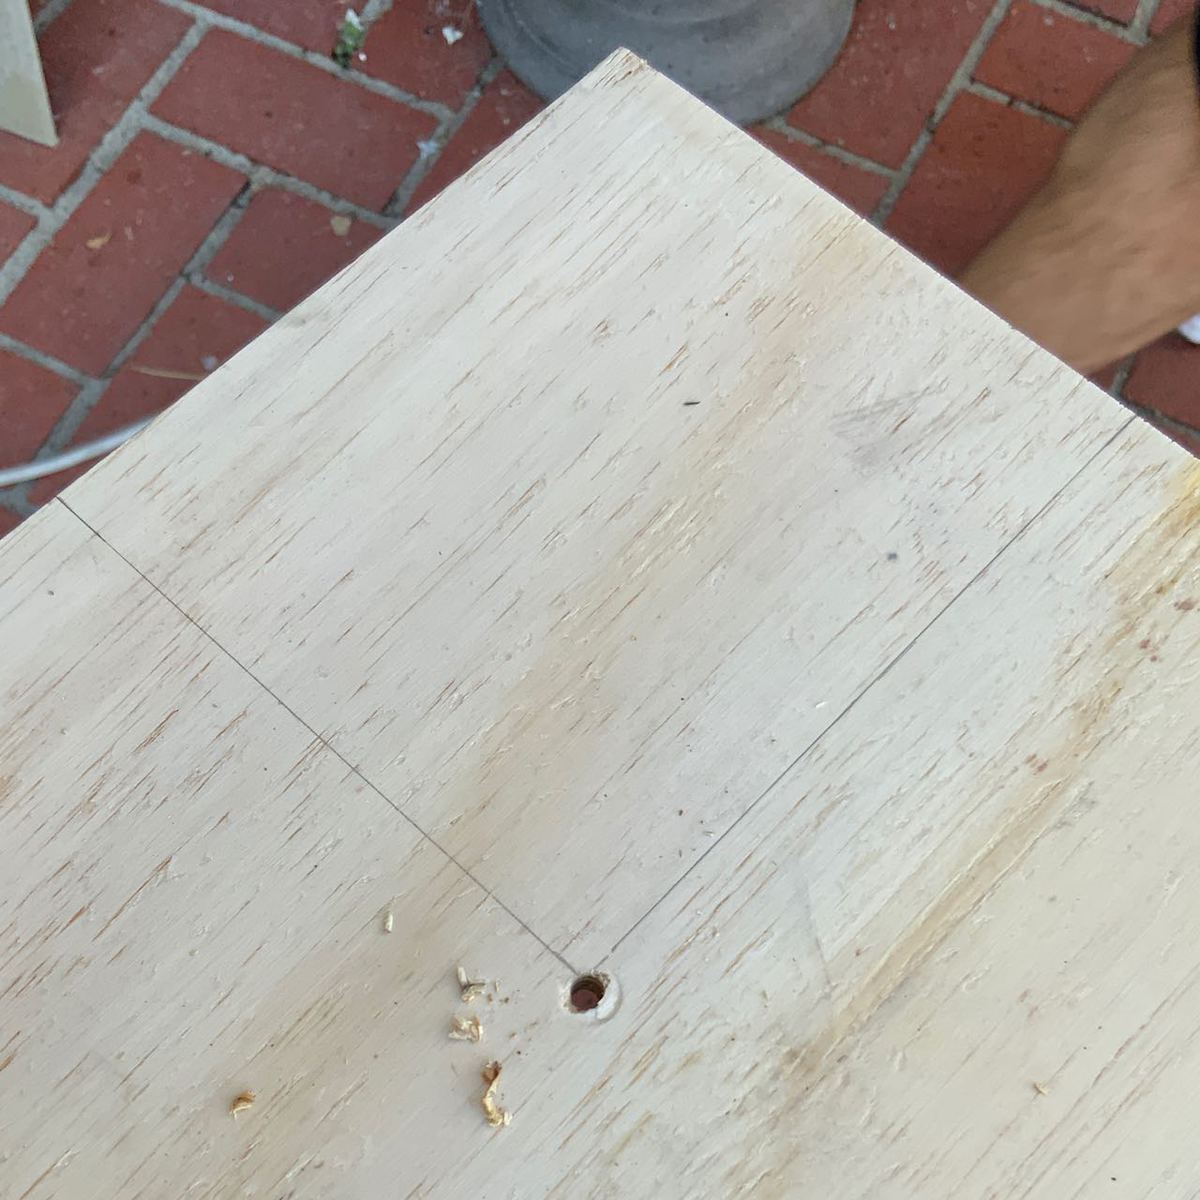 the drawing is shown on the corner of the wood with a hole drilled in the corner where the lines meet